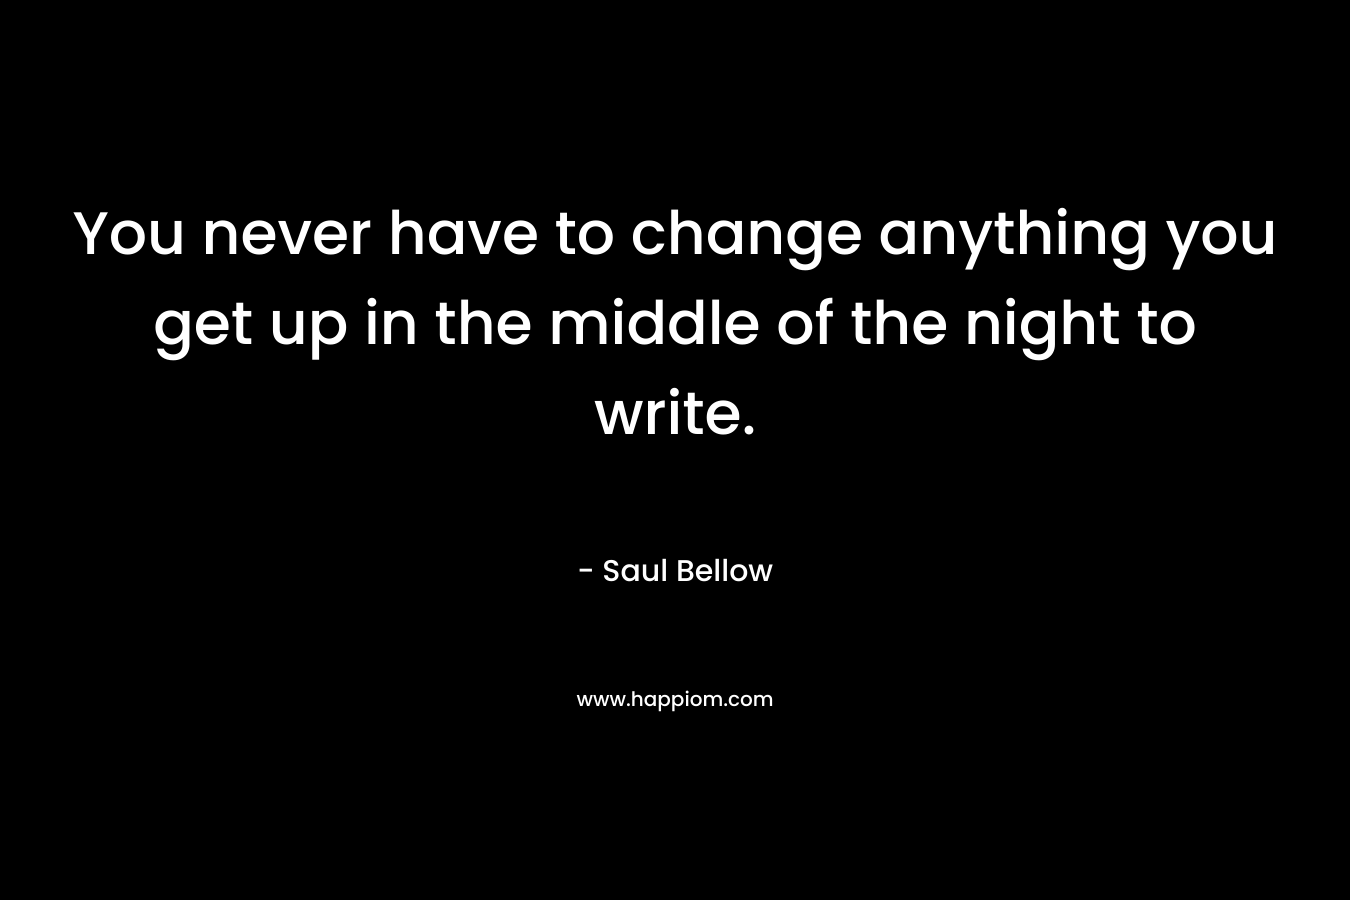 You never have to change anything you get up in the middle of the night to write.